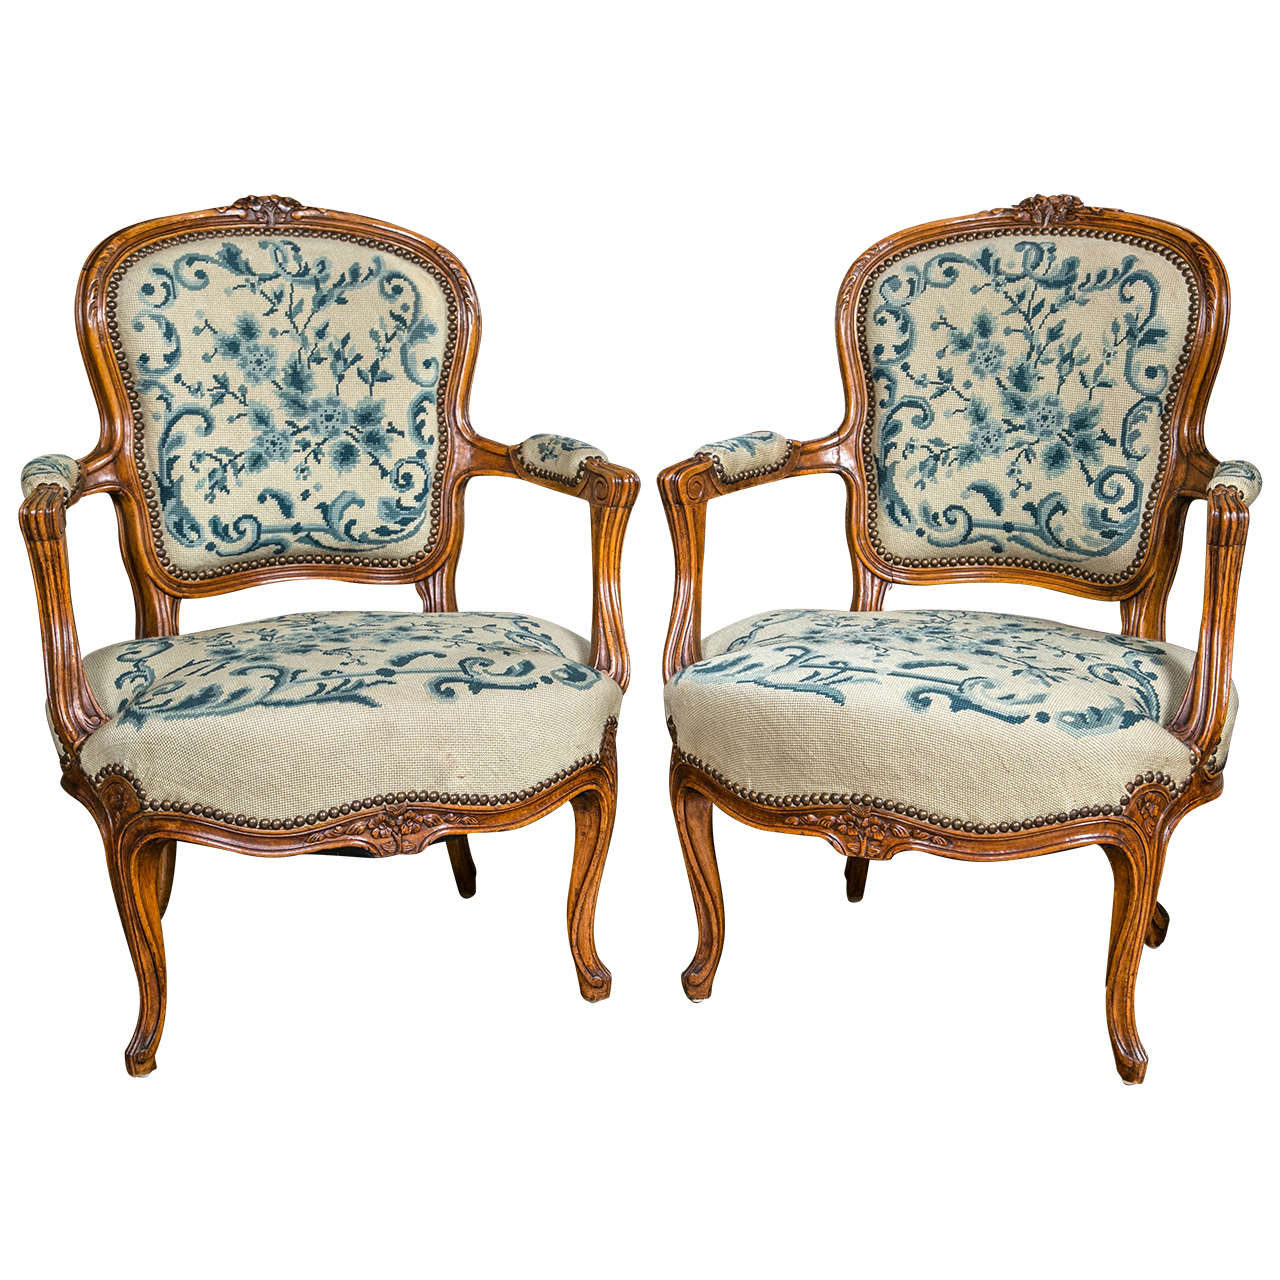 Pair of Louis XV Style Fauteuil Chairs